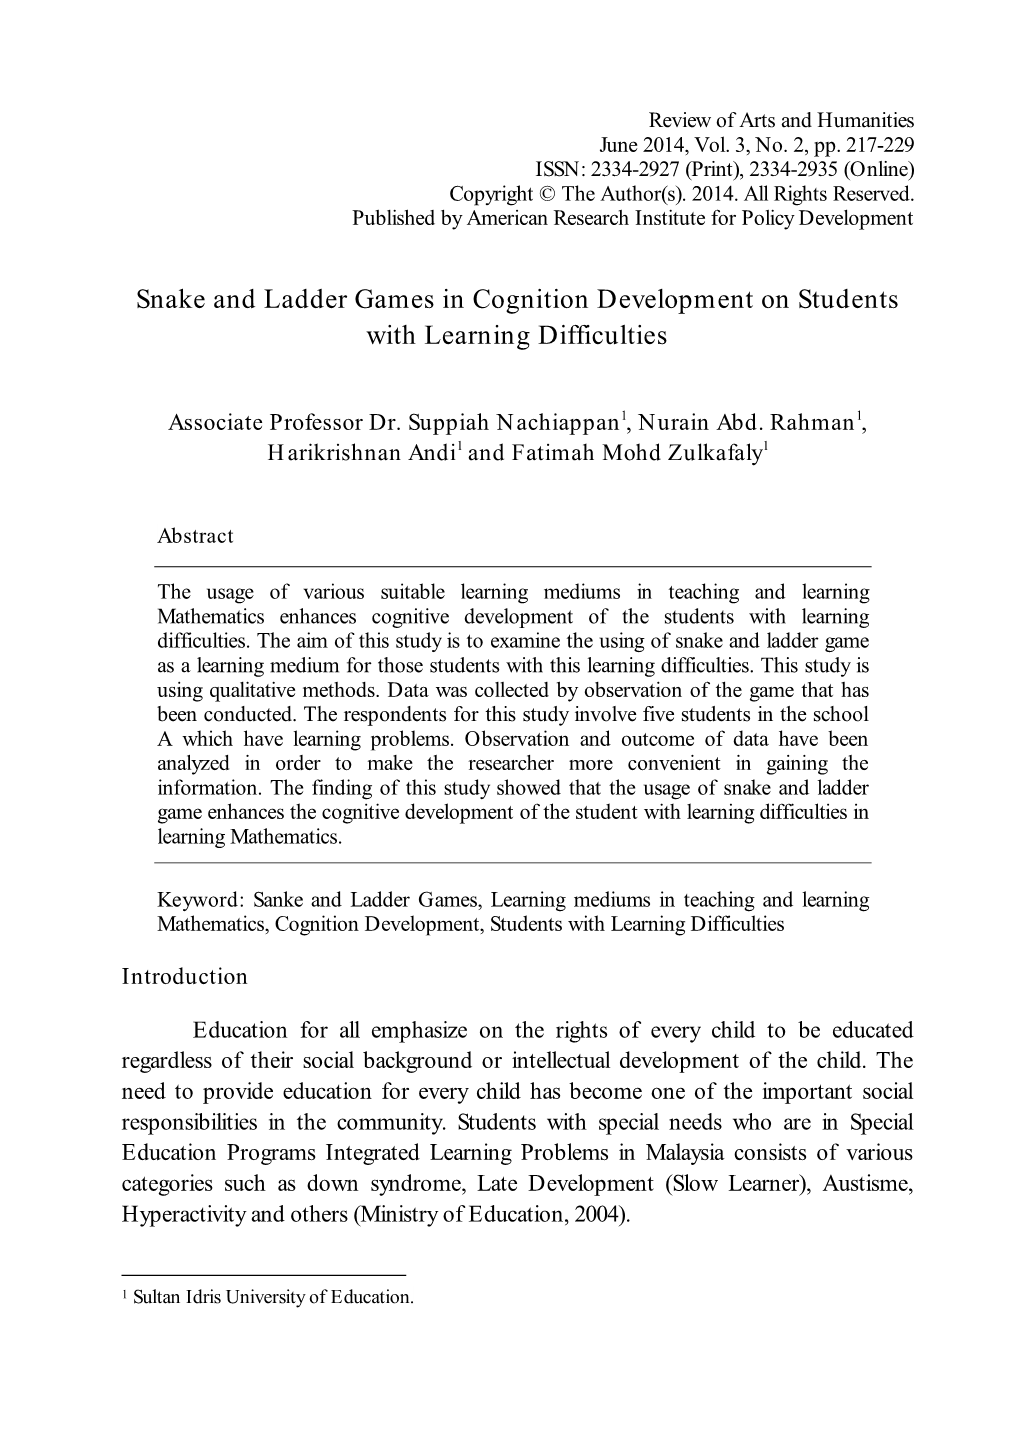 Snake and Ladder Games in Cognition Development on Students with Learning Difficulties